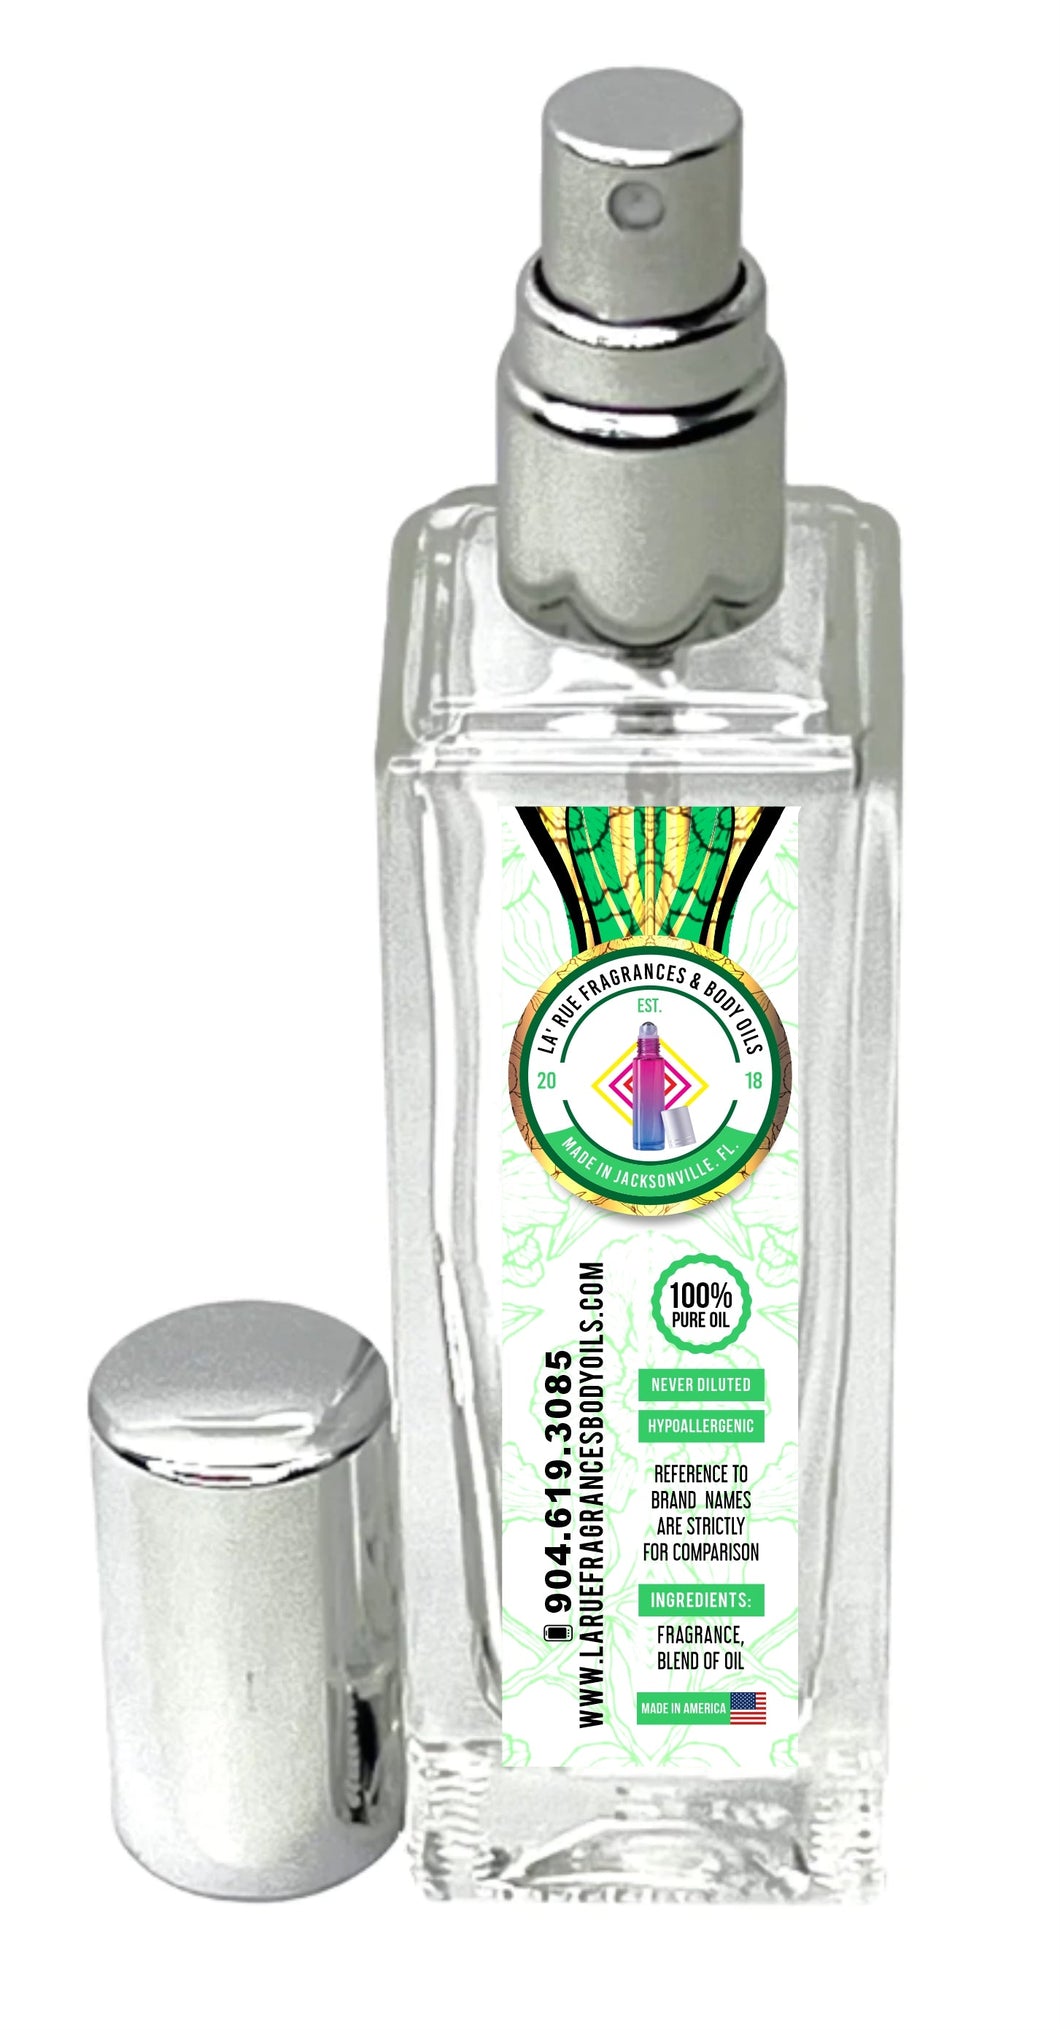 Compare aroma to Lafayatte Street by Bond no.9 women men type 1oz concentrated cologne-perfume spray (Unisex)